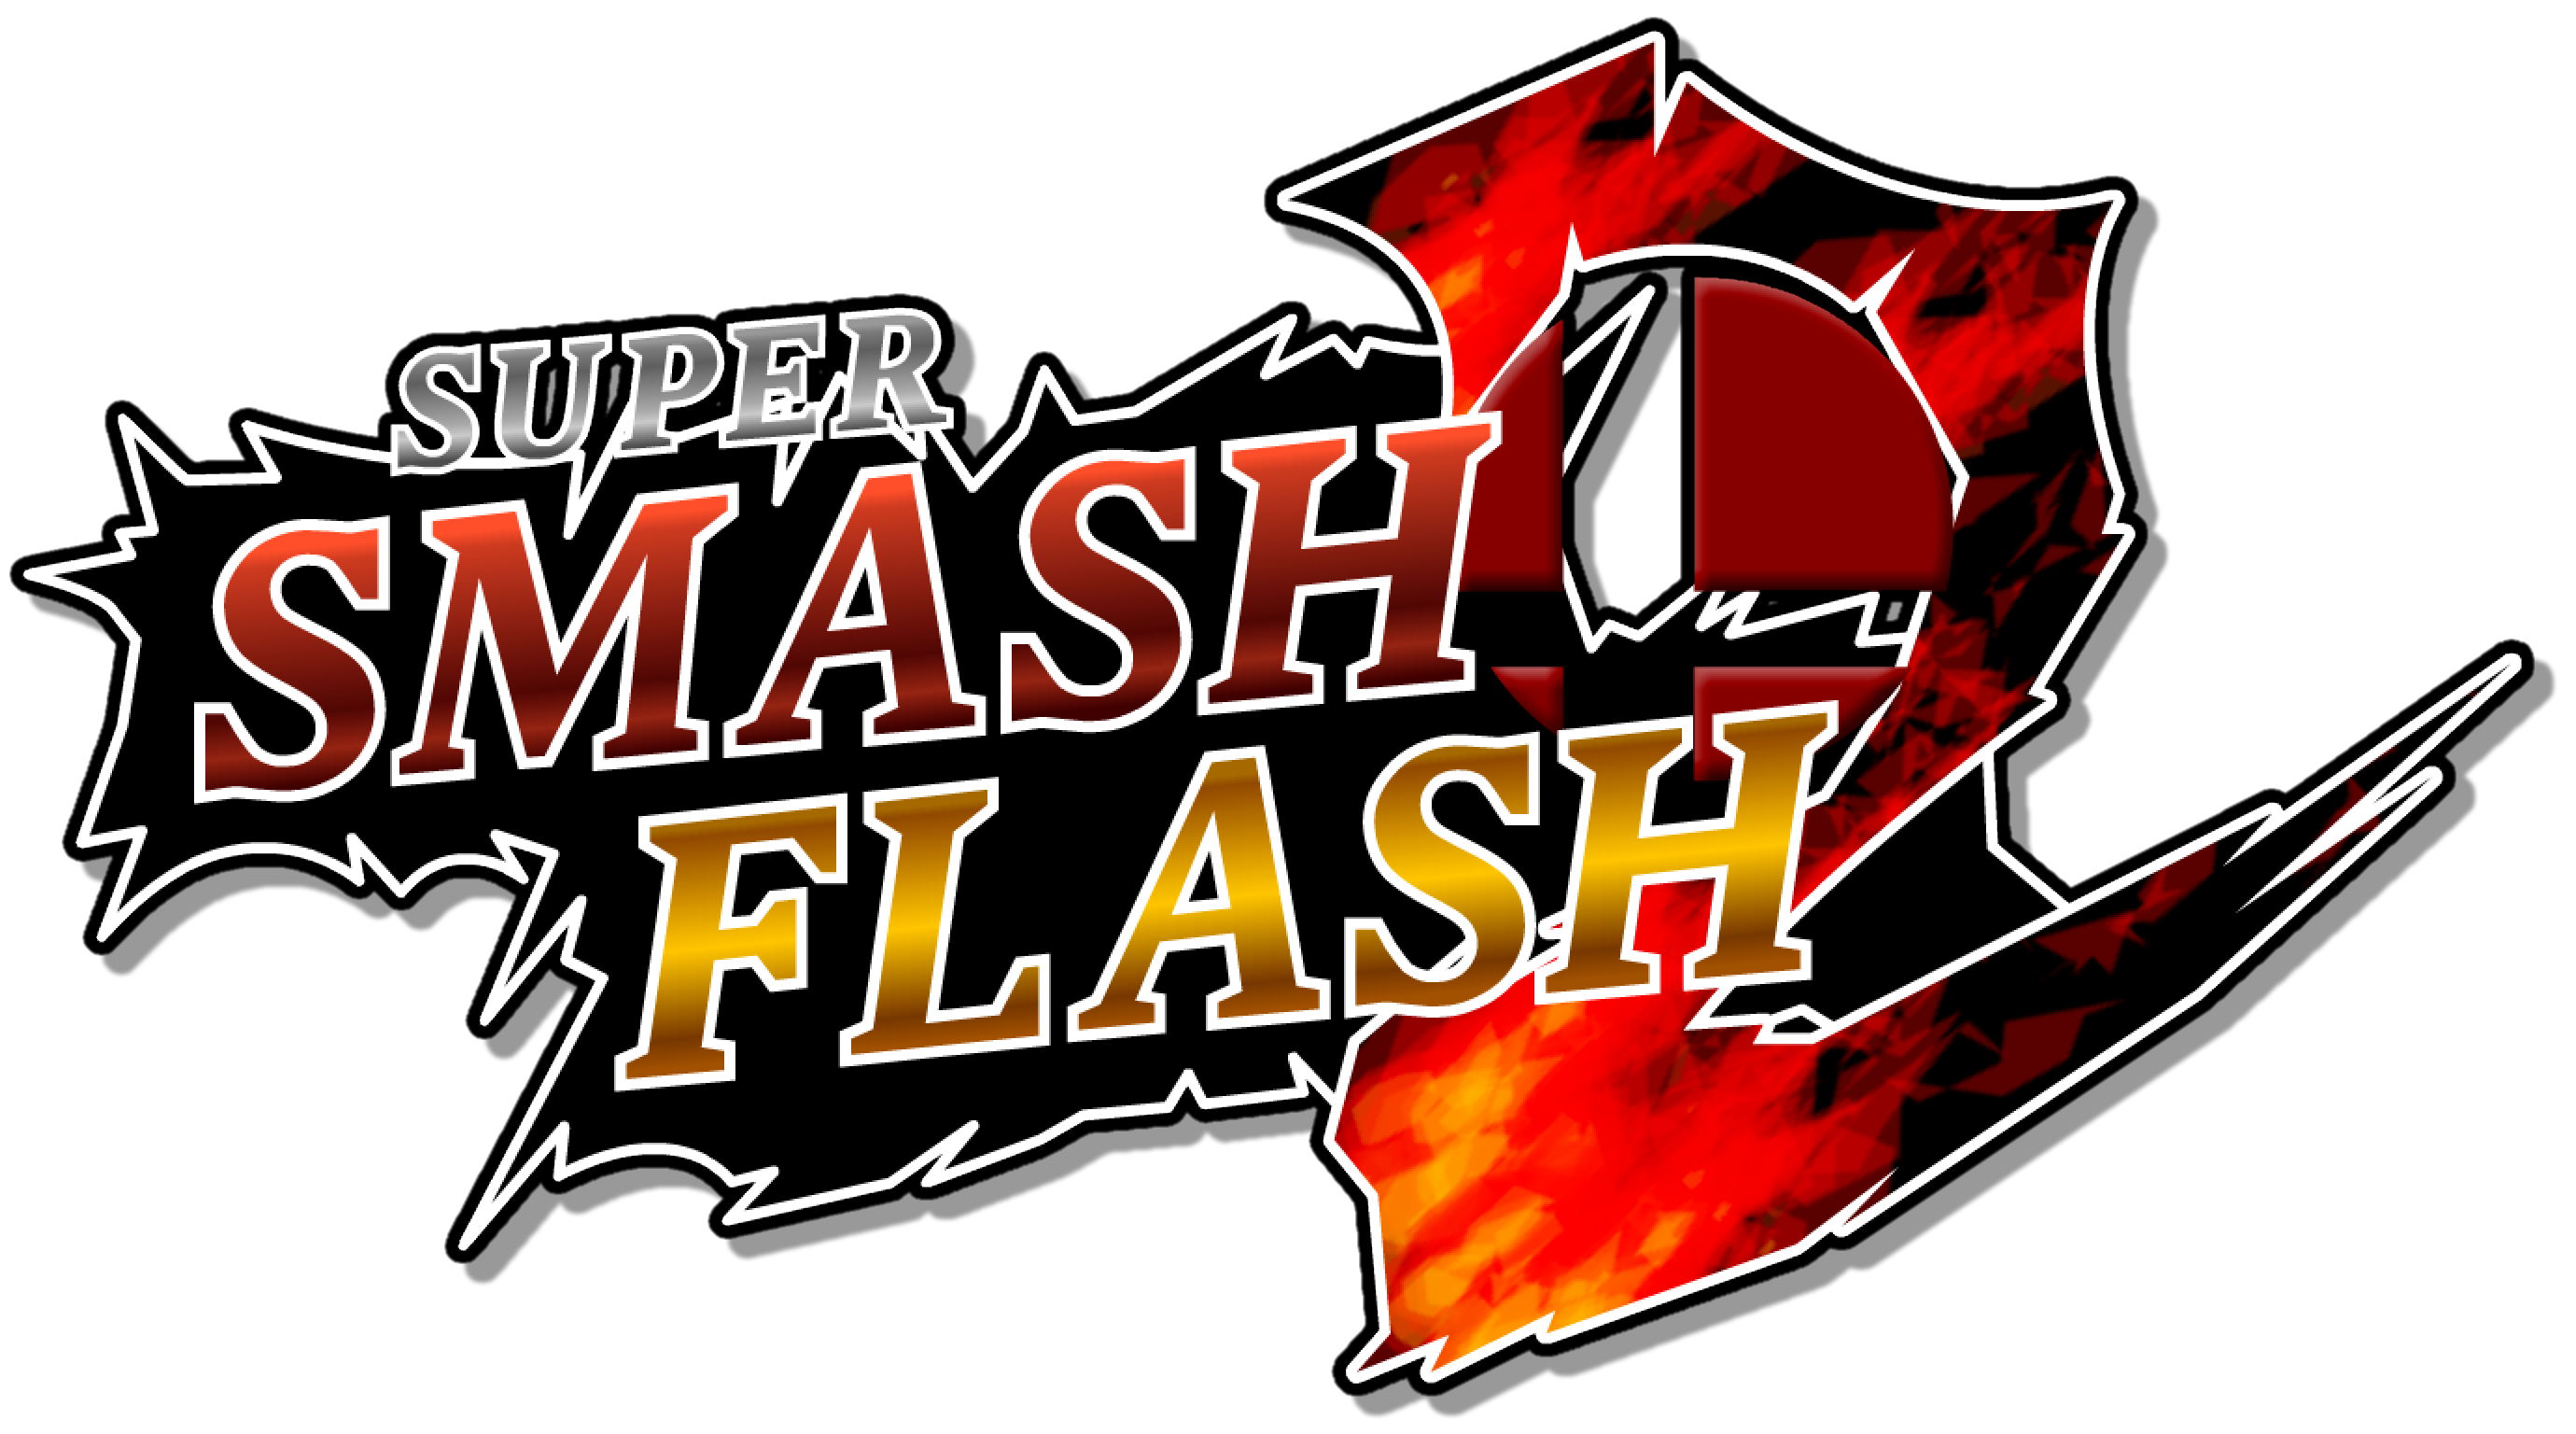 Super Smash Flash 2 Project B Patch 9 - All Characters (Who has the voice  clip) 